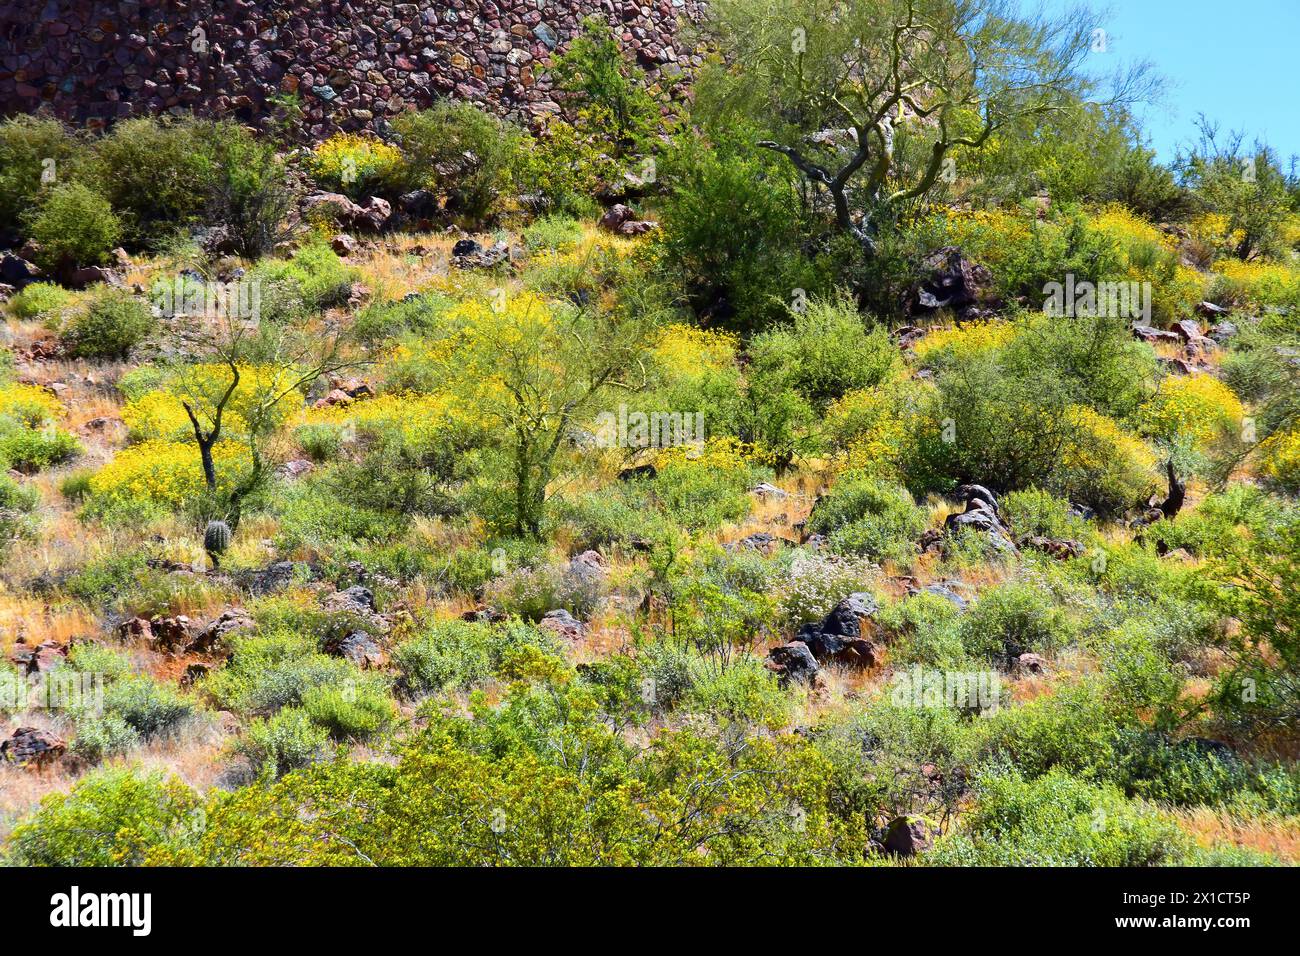 The Vast Sonora desert in central Arizona USA on a early spring morning with wildflowers Brittlebush and Texas Bluebonnets Stock Photo